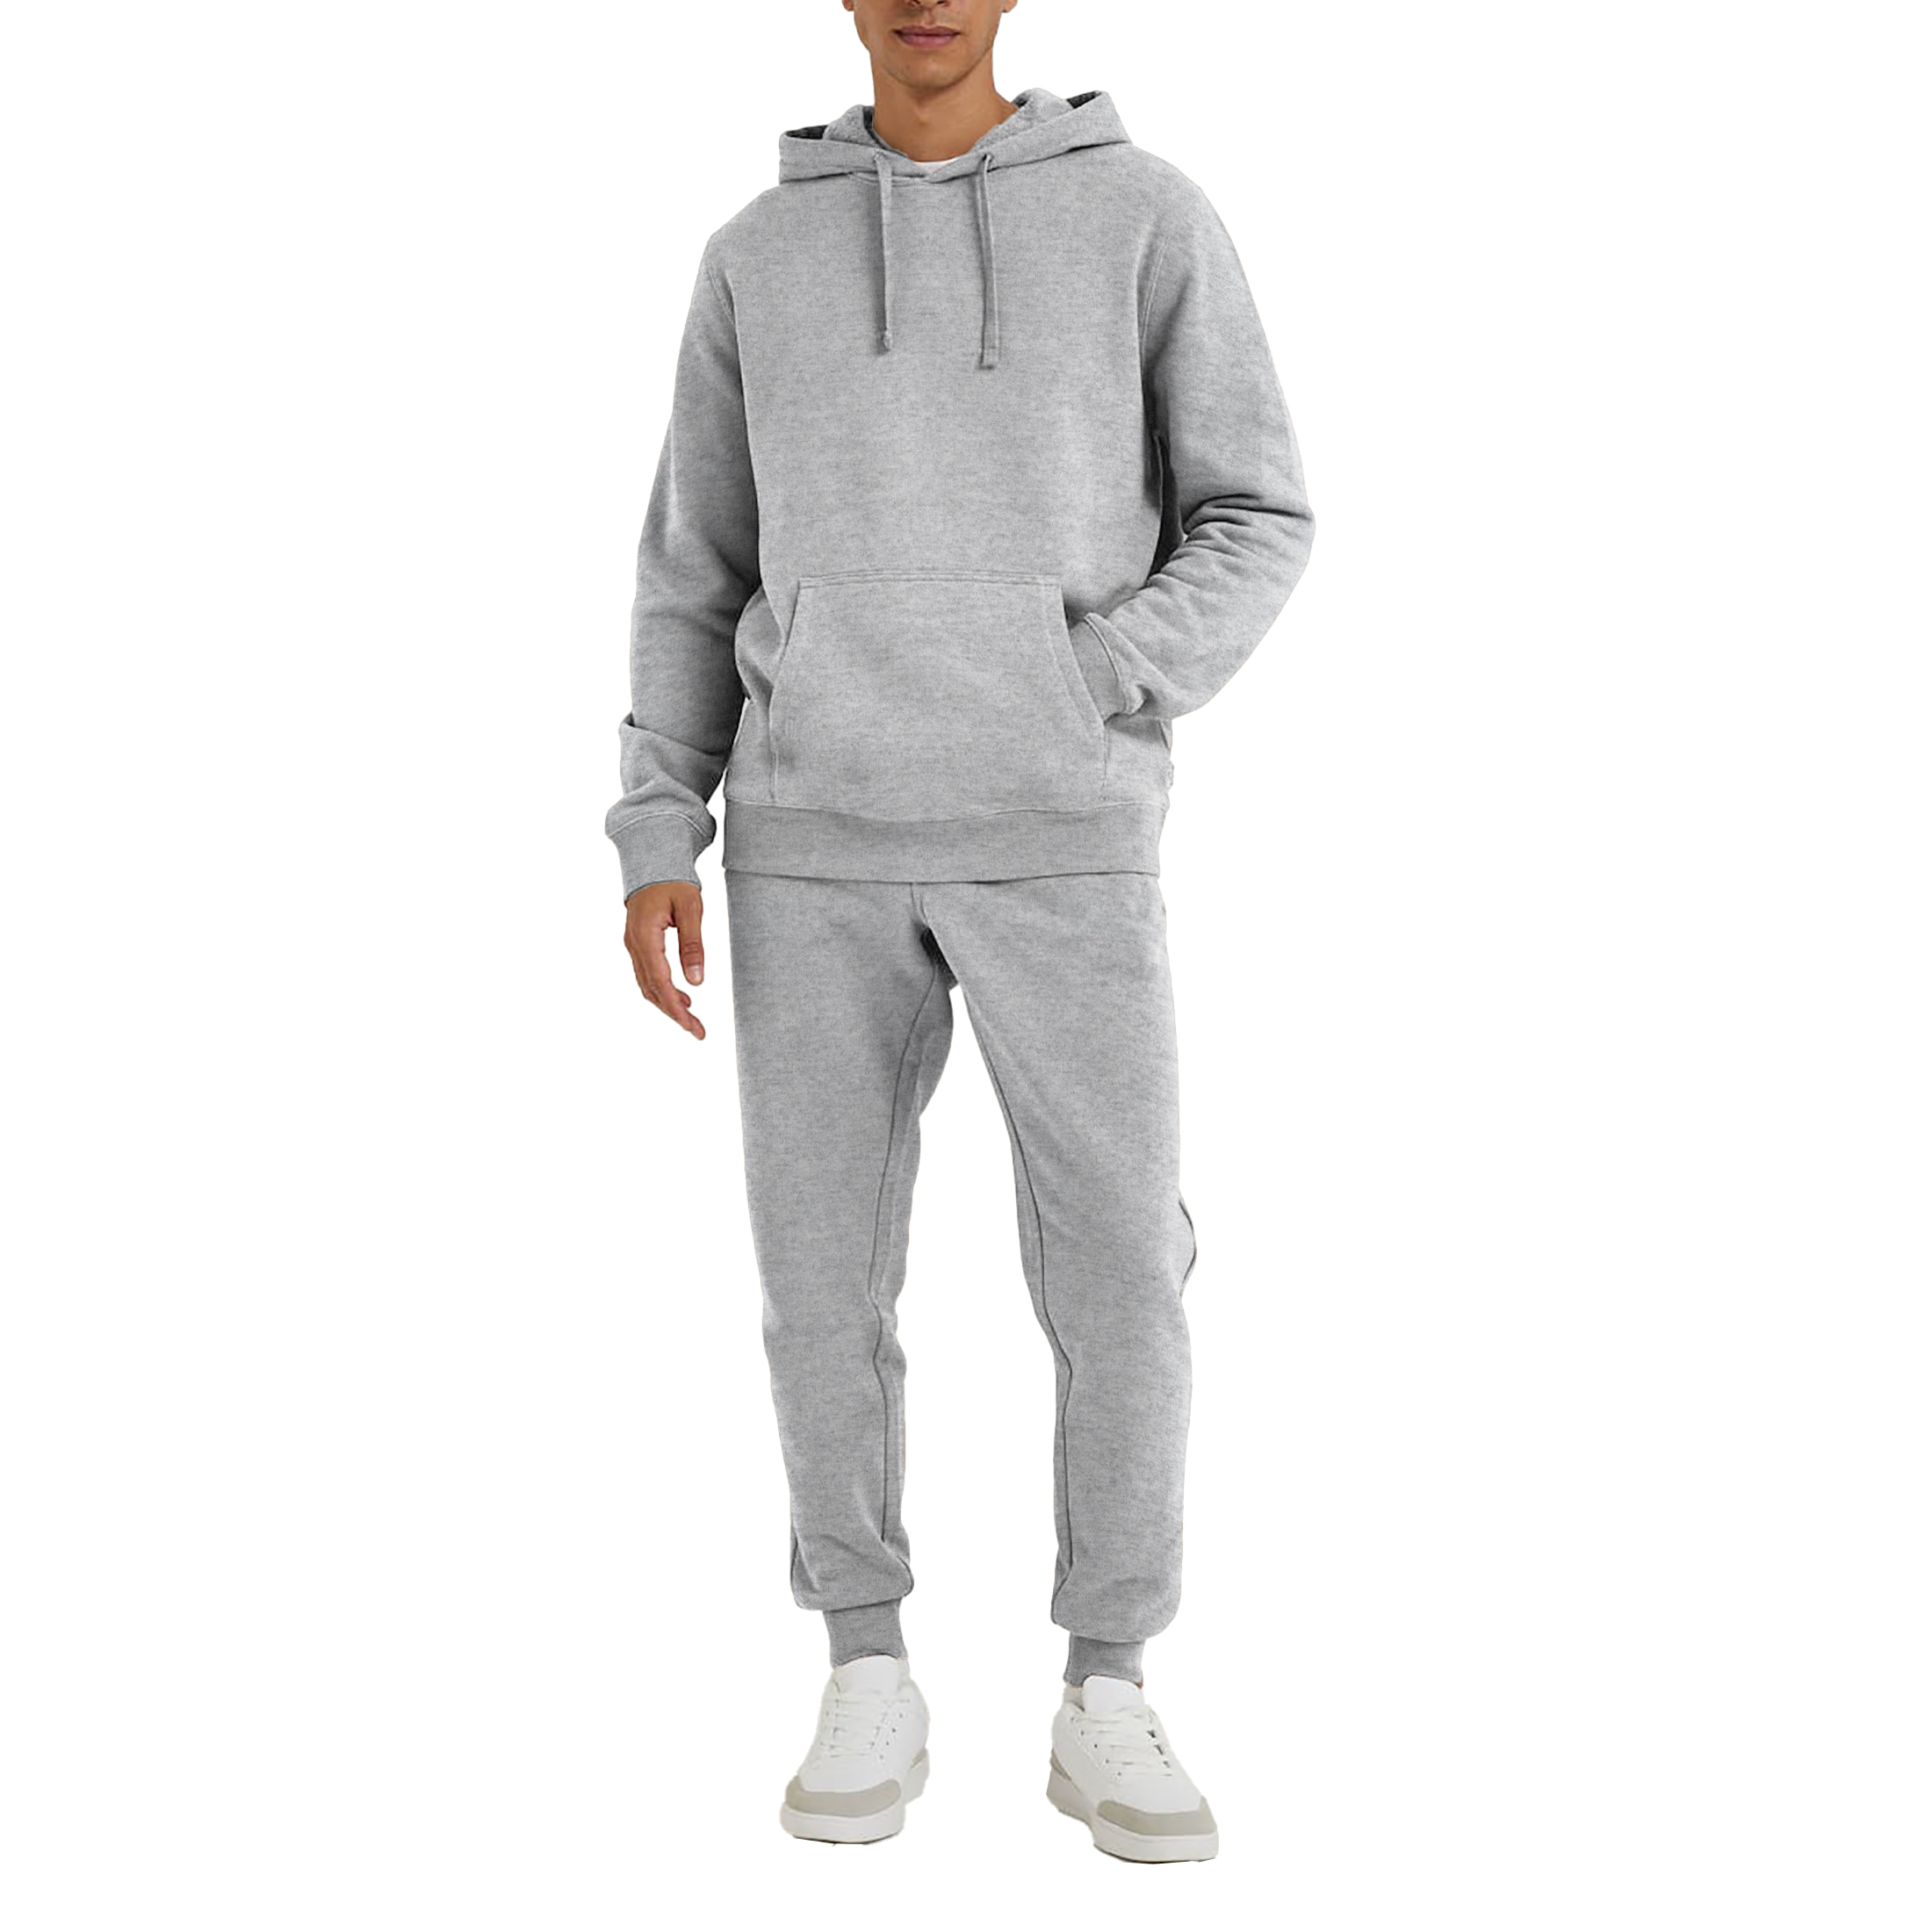 Men's Athletic Warm Jogging Pullover Active Tracksuit - Grey, Small